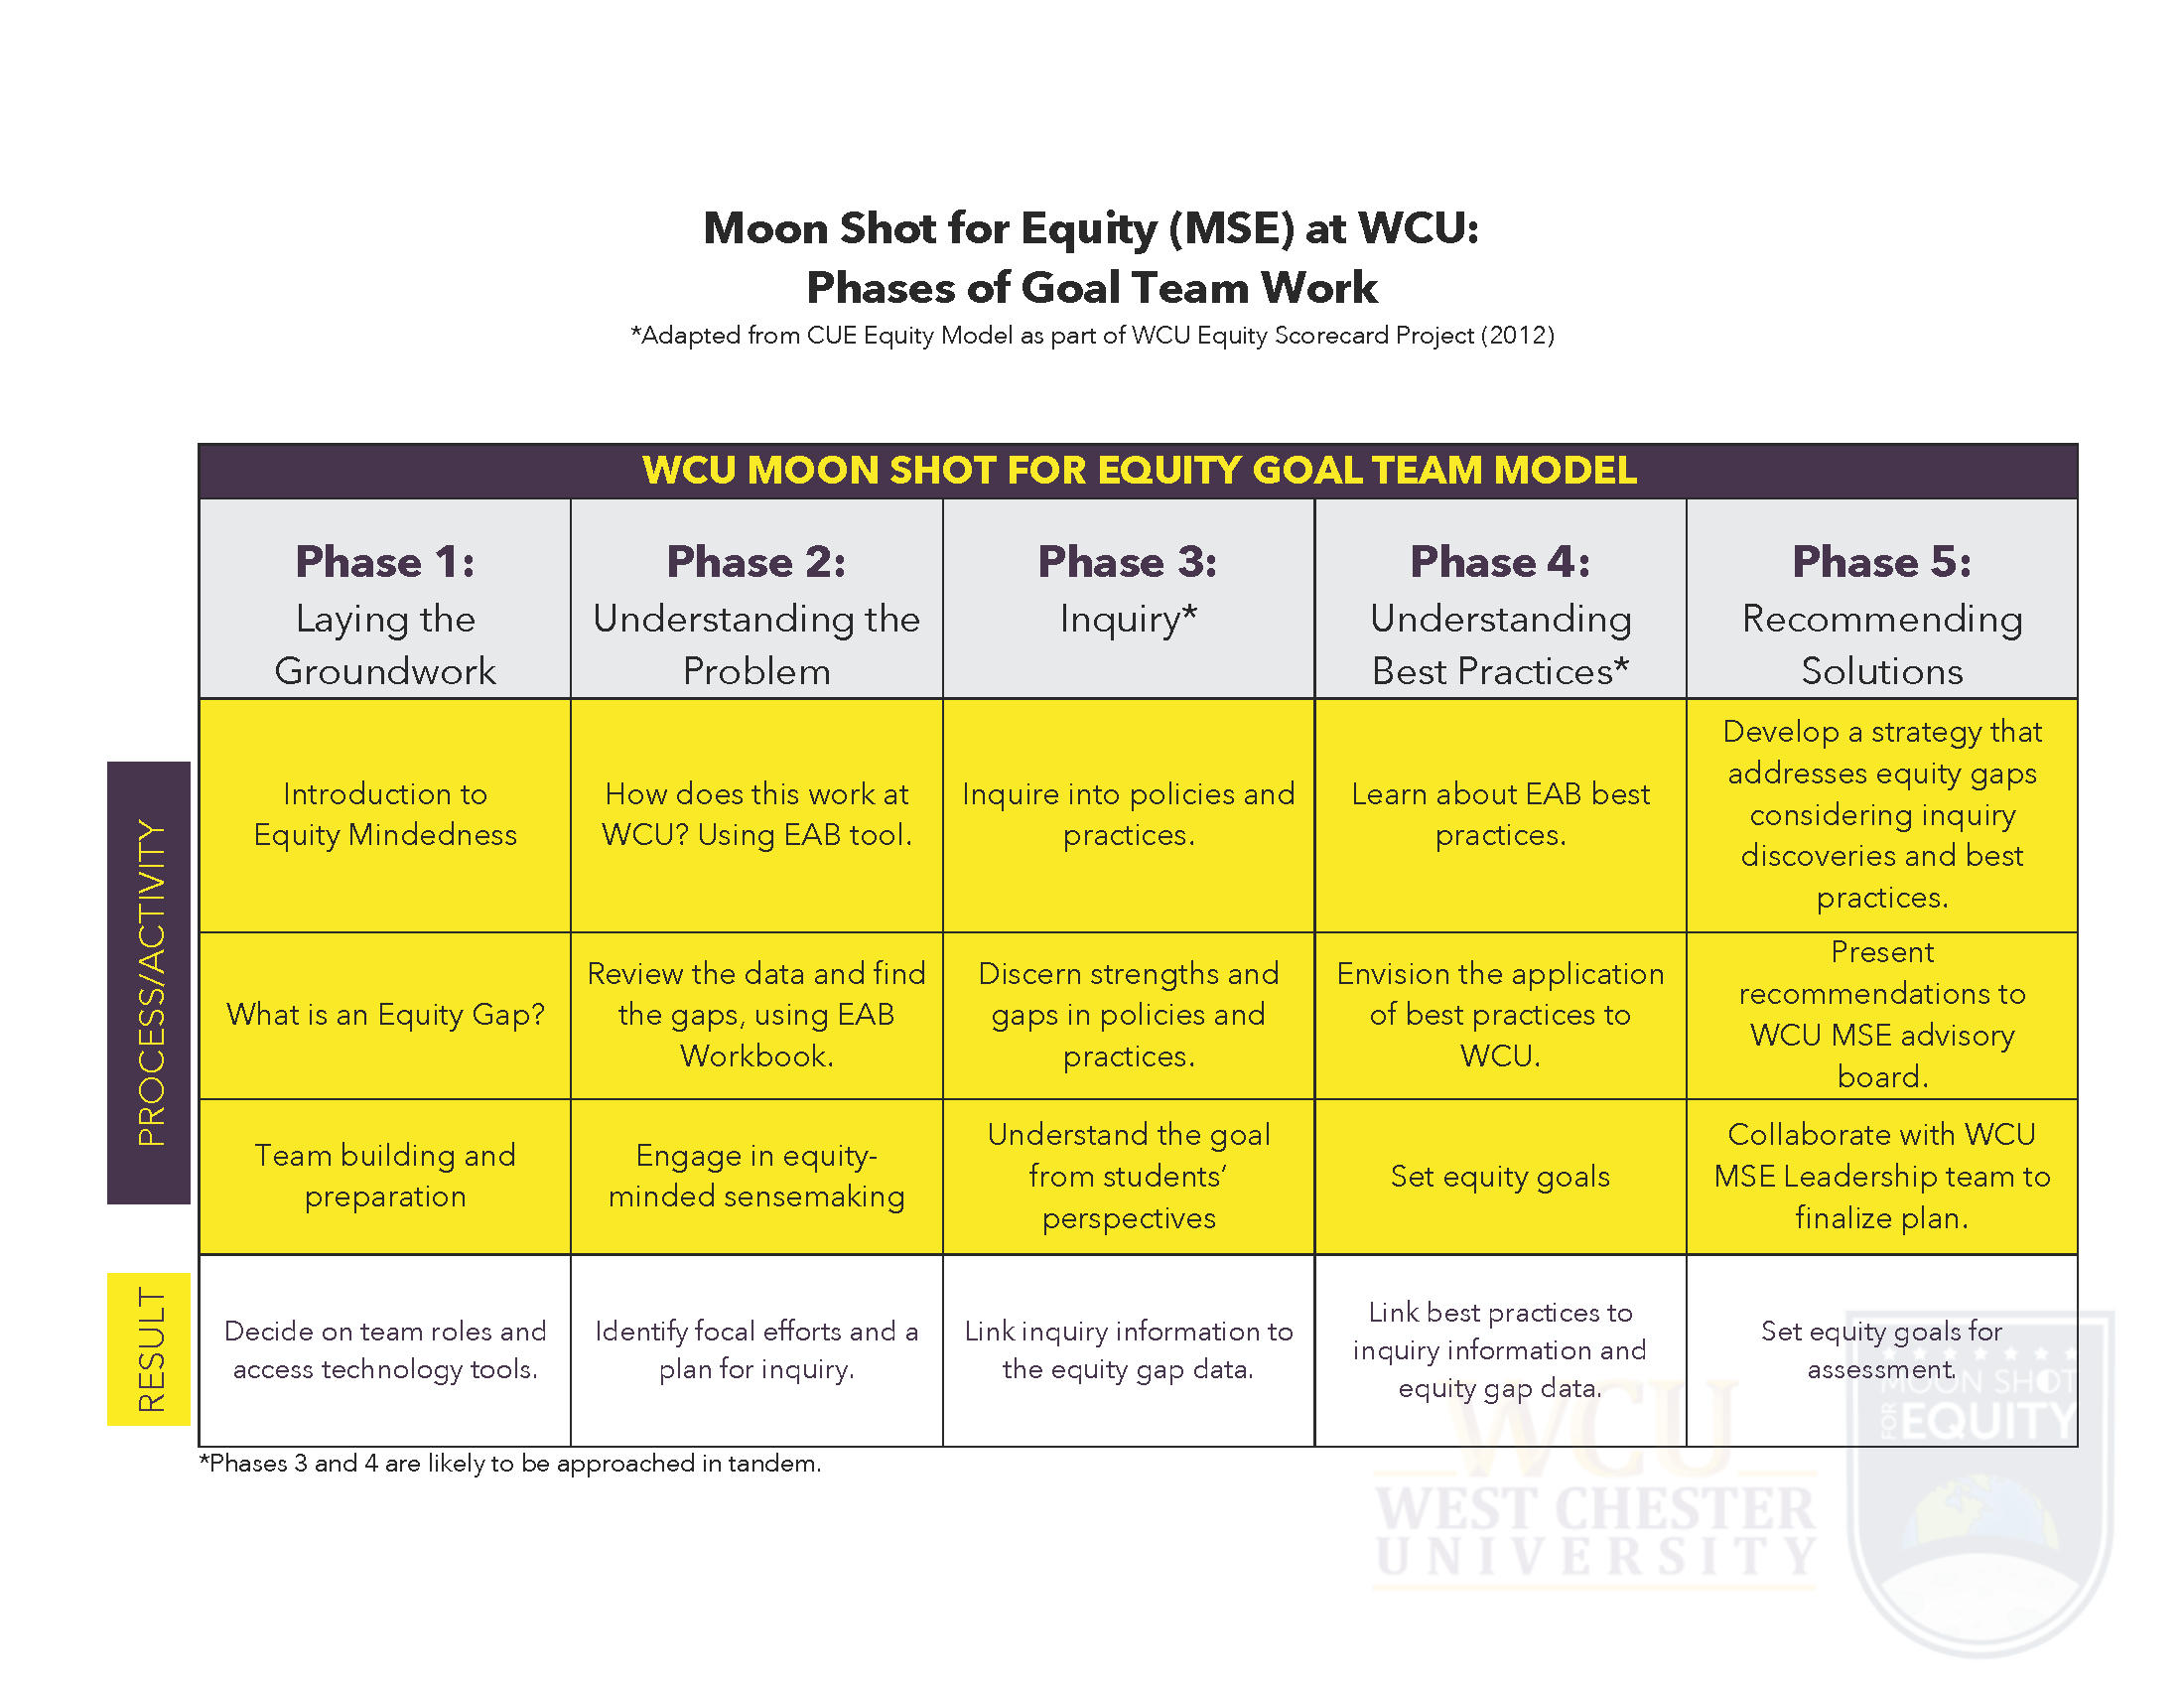                       RESULT                      PROCESS/ACTIVITY                      Moon Shot for Equity (MSE) at WCU:                      Phases of Goal Team Work                      *Adapted from CUE Equity Model as part of WCU Equity Scorecard Project (2012)                      Phase 1: Laying the Groundwork                      Introduction to Equity Mindedness                      What is an Equity Gap?                      Team building and preparation                      WCU MOON SHOT FOR EQUITY GOAL TEAM MODEL                      Phase 2: Understanding the Problem                      How does this work at WCU? Using EAB tool.                      Review the data and find the gaps, using EAB Workbook.                      Engage in equity- minded sensemaking                      Decide on team roles and access technology tools.                      Identify focal efforts and a plan for inquiry.                      *Phases 3 and 4 are likely to be approached in tandem.                      Phase 4: Understanding                      Phase 3: Inquiry*                      Best Practices*                      Inquire into policies and practices.                      Discern strengths and gaps in policies and practices.                      Understand the goal from students' perspectives                      Link inquiry information to the equity gap data.                      Learn about EAB best practices.                      Envision the application of best practices to WCU.                      Set equity goals                      Link best practices to inquiry information and equity gap data.                      Phase 5: Recommending Solutions                      Develop a strategy that addresses equity gaps                      considering inquiry discoveries and best practices.                      Present                      recommendations to WCU MSE advisory board.                      Collaborate with WCU MSE Leadership team to finalize plan.                      Set equity goals for                      WEST CHESTER UNIVERSITY                      assessment.                      SHOT                      EQUITY